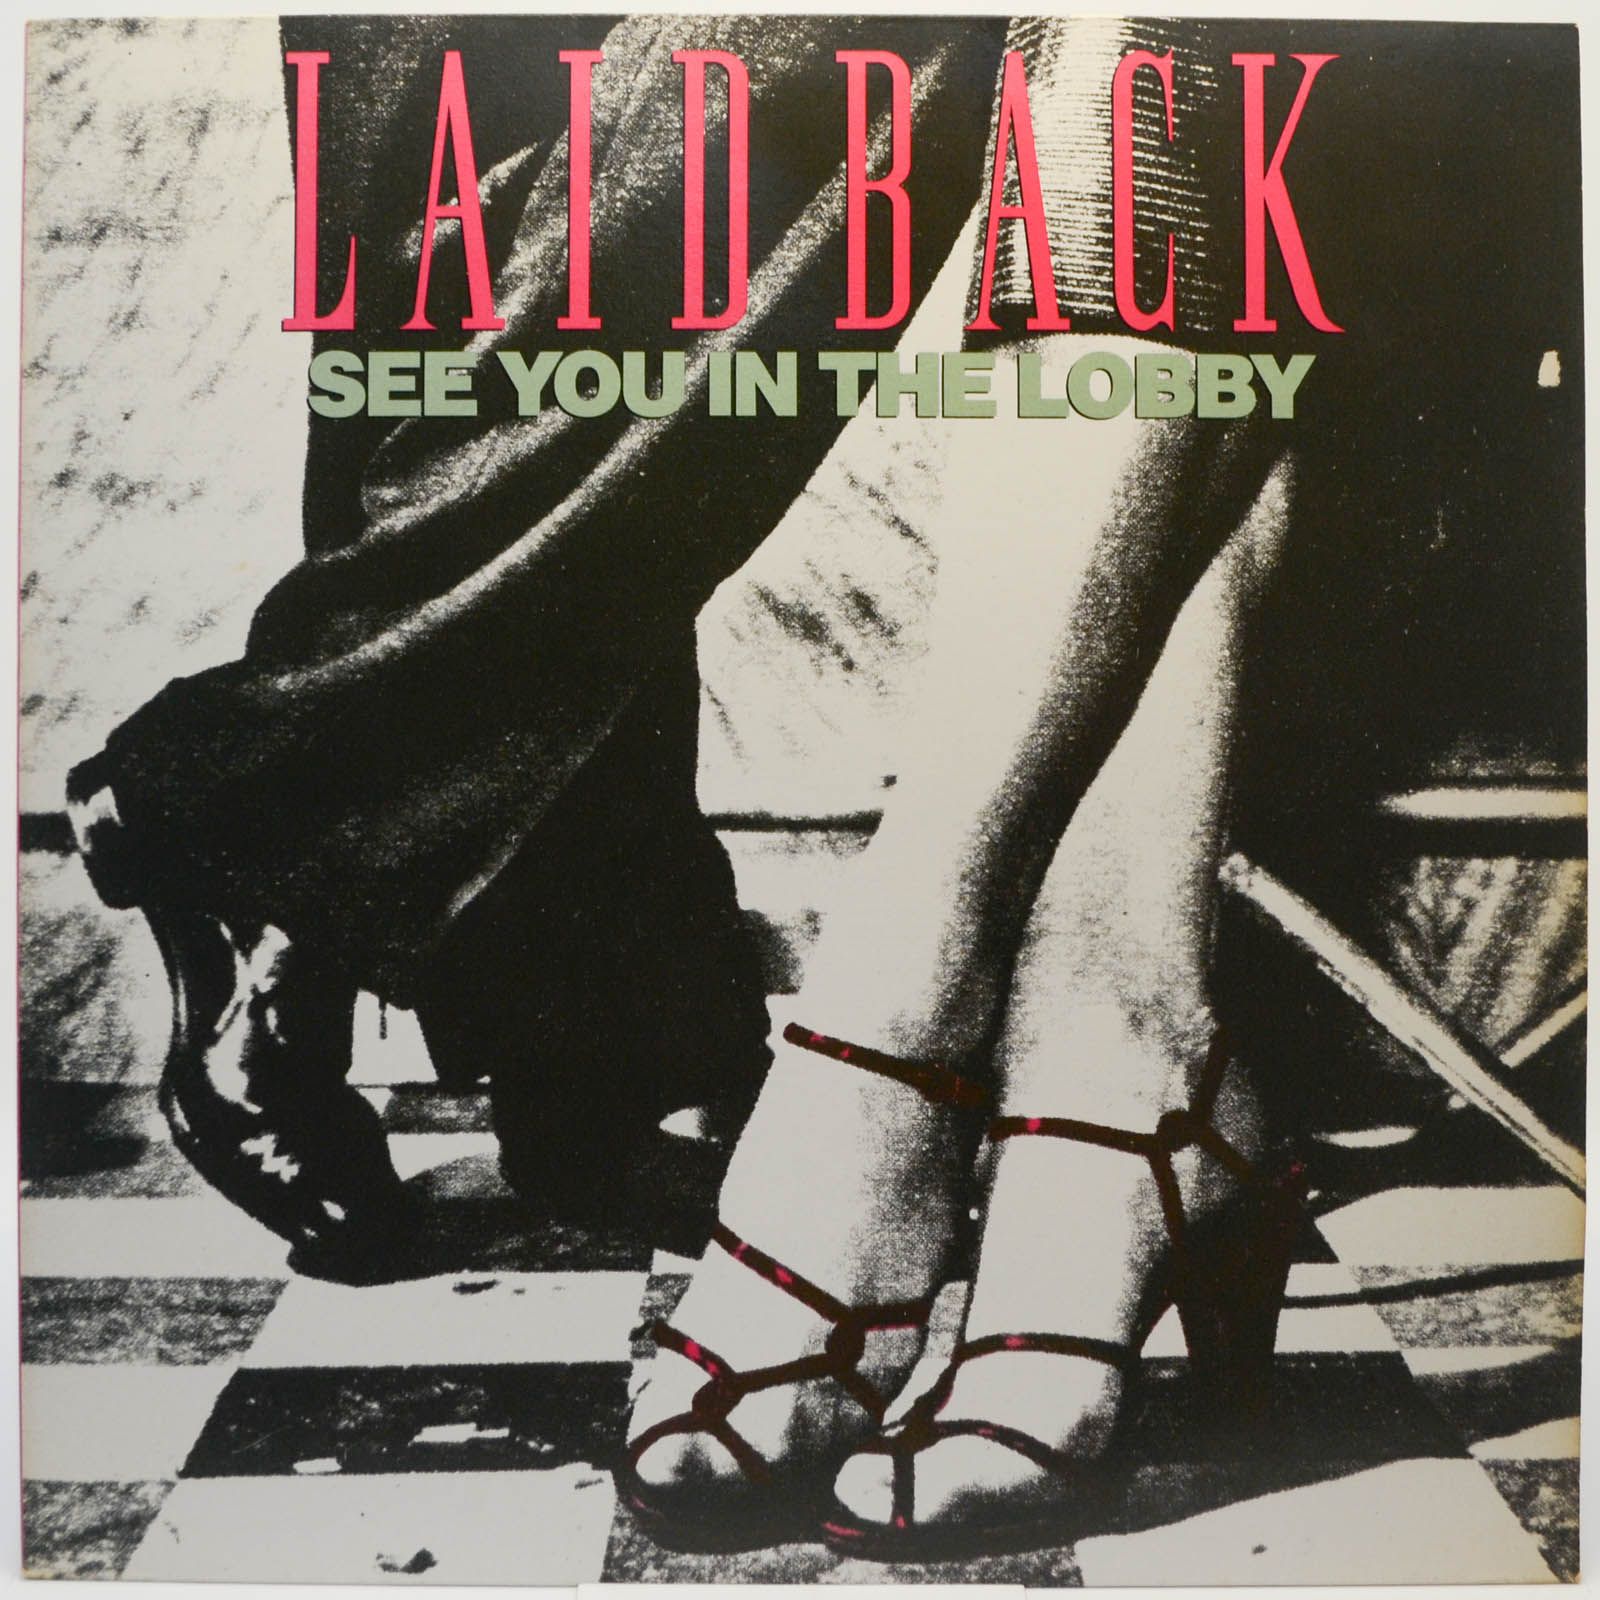 Laid Back — See You In The Lobby, 1987